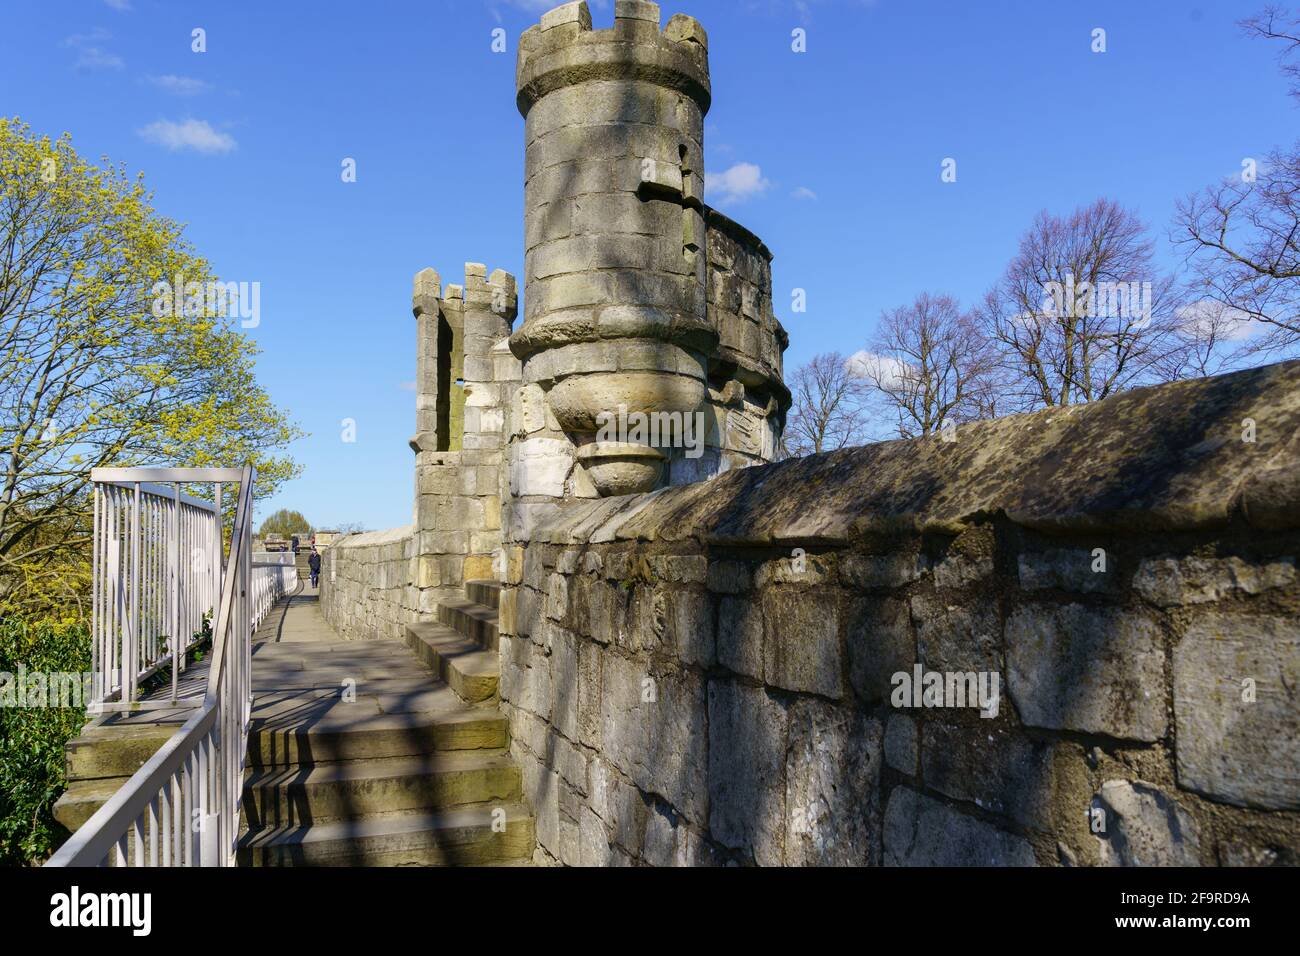 North Corner of the Roman Walls in York, Featuring Pepper Pot Turret Towers, North Yorkshire, England, UK. Stock Photo